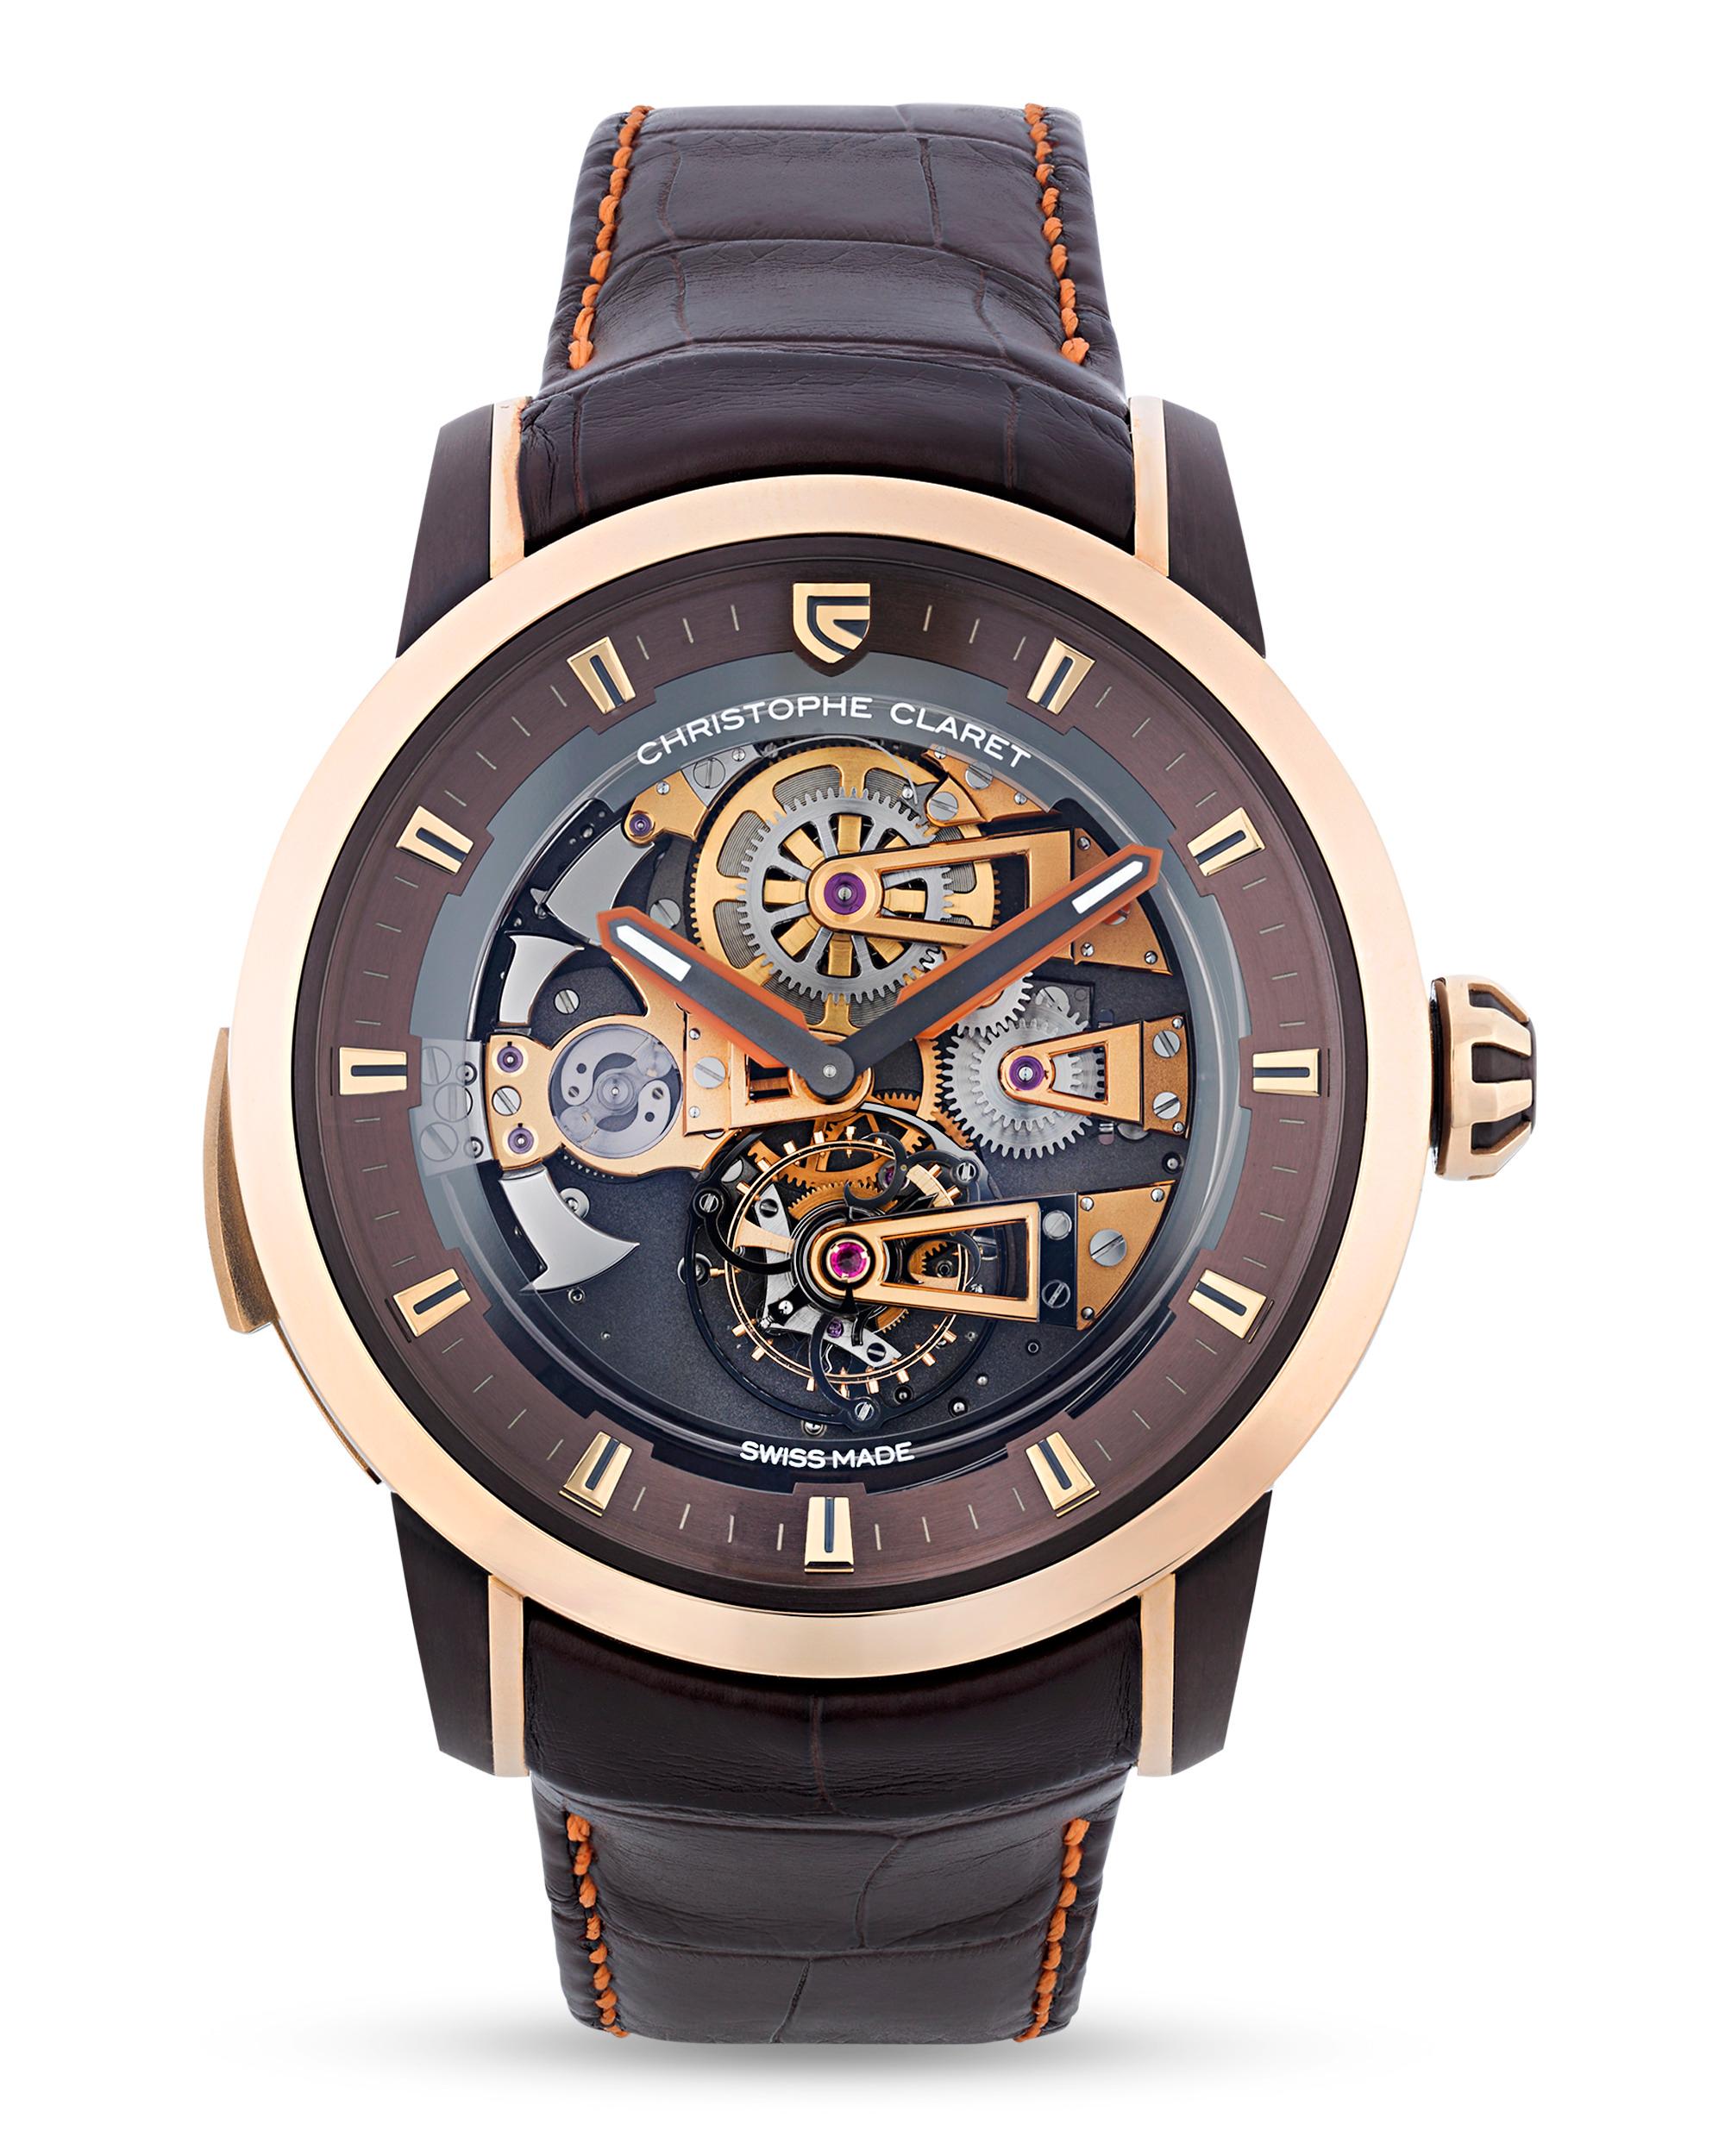 Hailing from the Christophe Claret limited edition Soprano collection, this watch possesses two of the most sought after complications among luxury timepiece collectors: a tourbillon movement and minute repeater. The tourbillon was specially